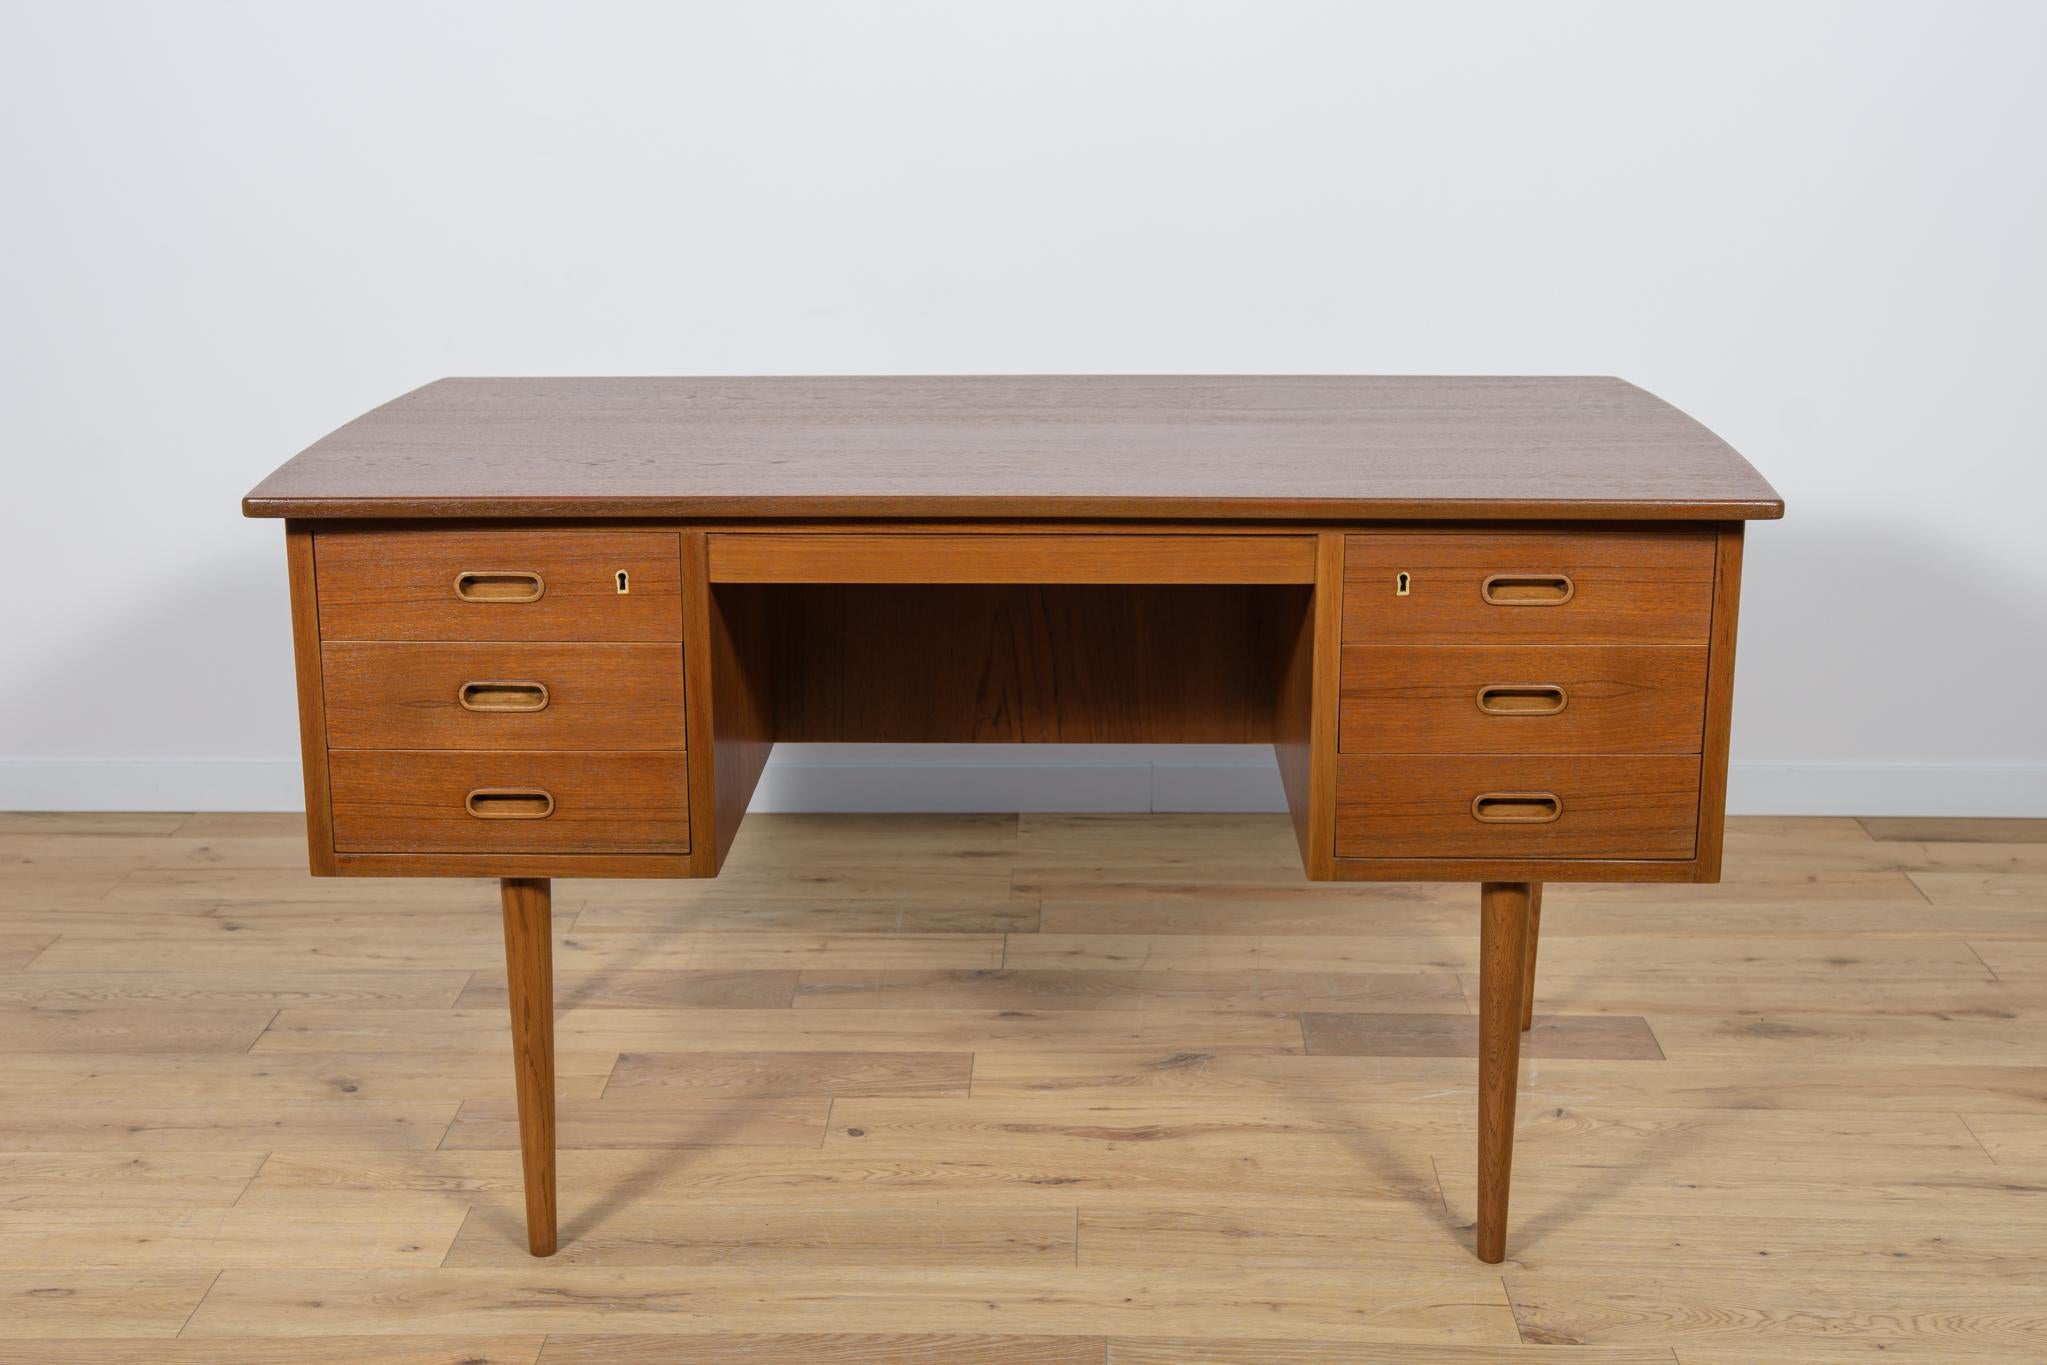 This desk made in Denmark in the 1960s. The desk is made of teak wood and is free-standing thanks to the finished back with an open storage space (bookcase). There are two modules at the front - three drawers each. The teak elements have been